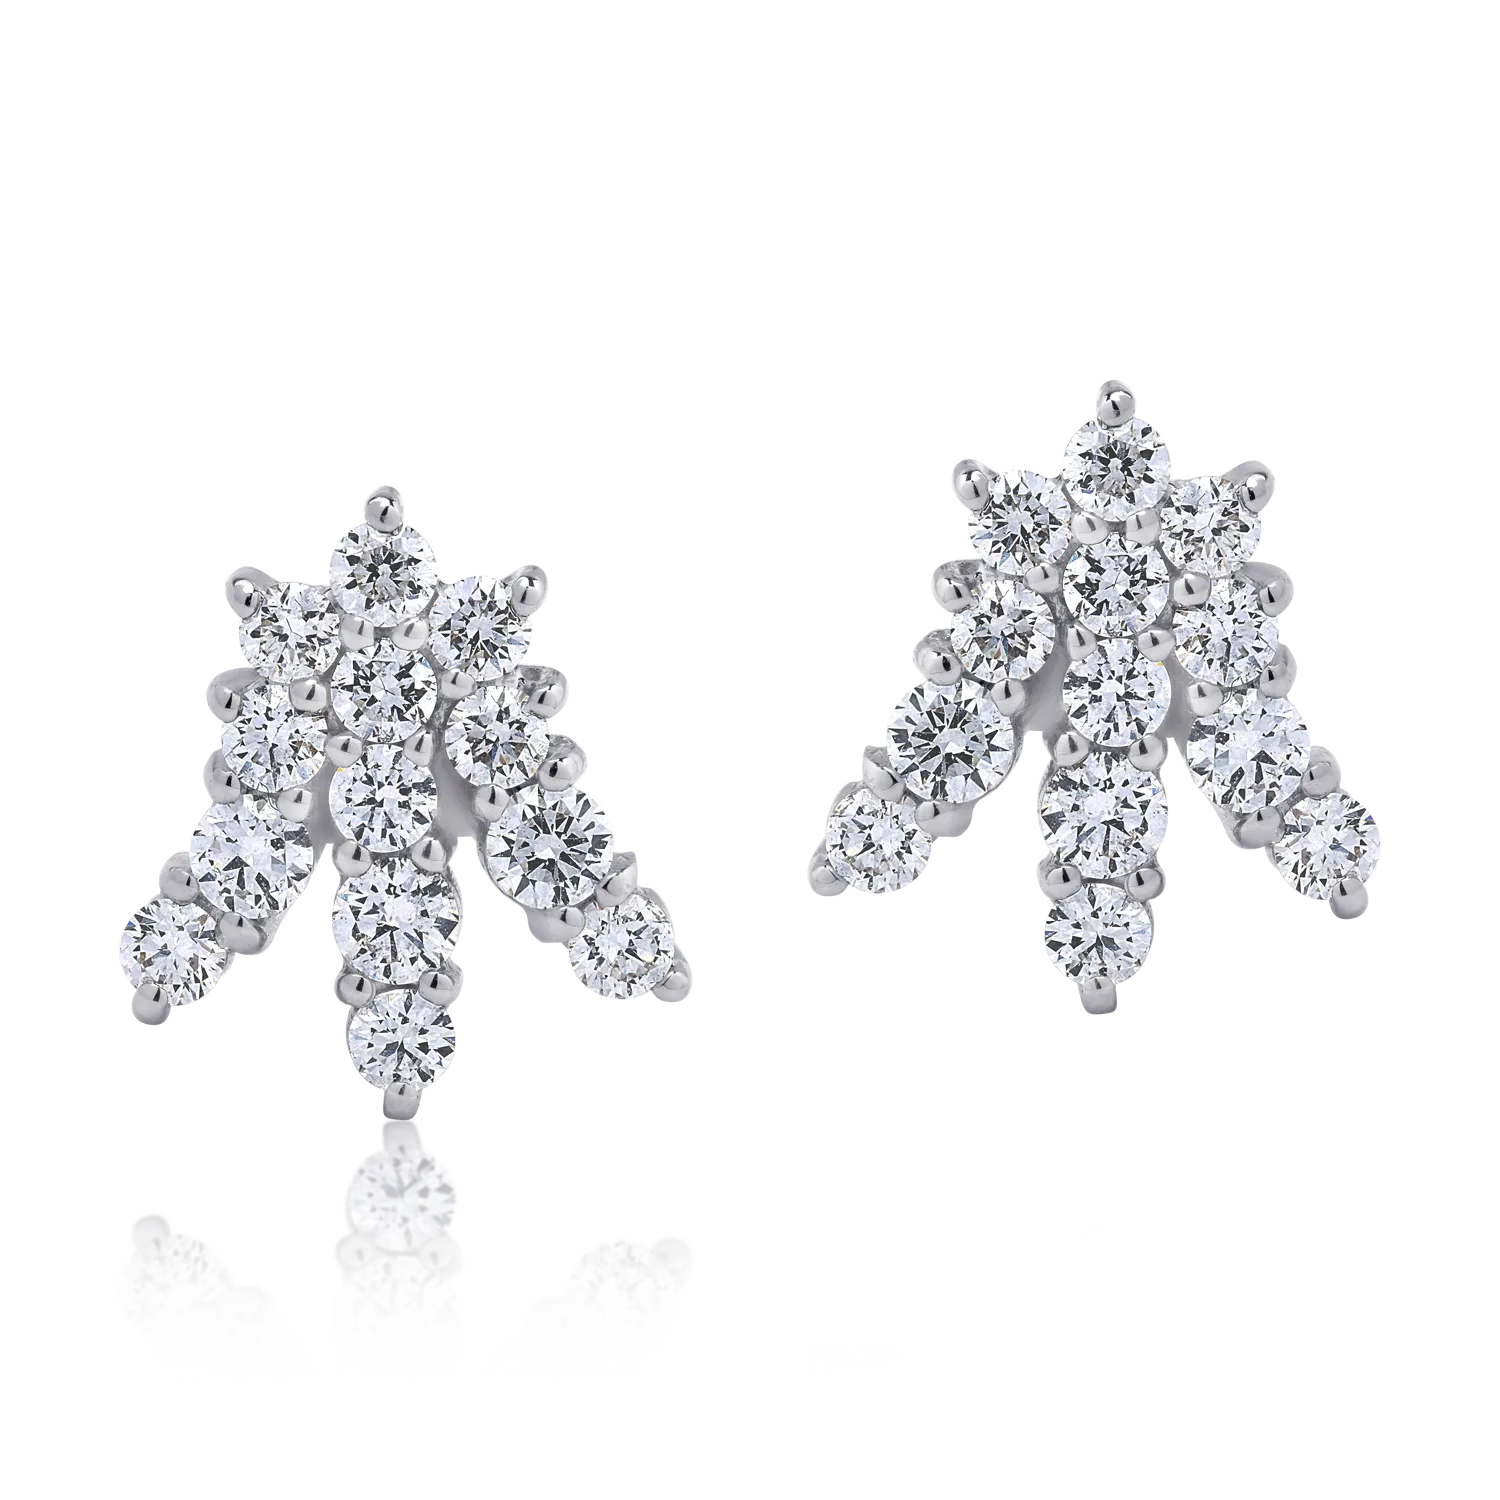 18K white gold earrings with 1.02ct diamonds